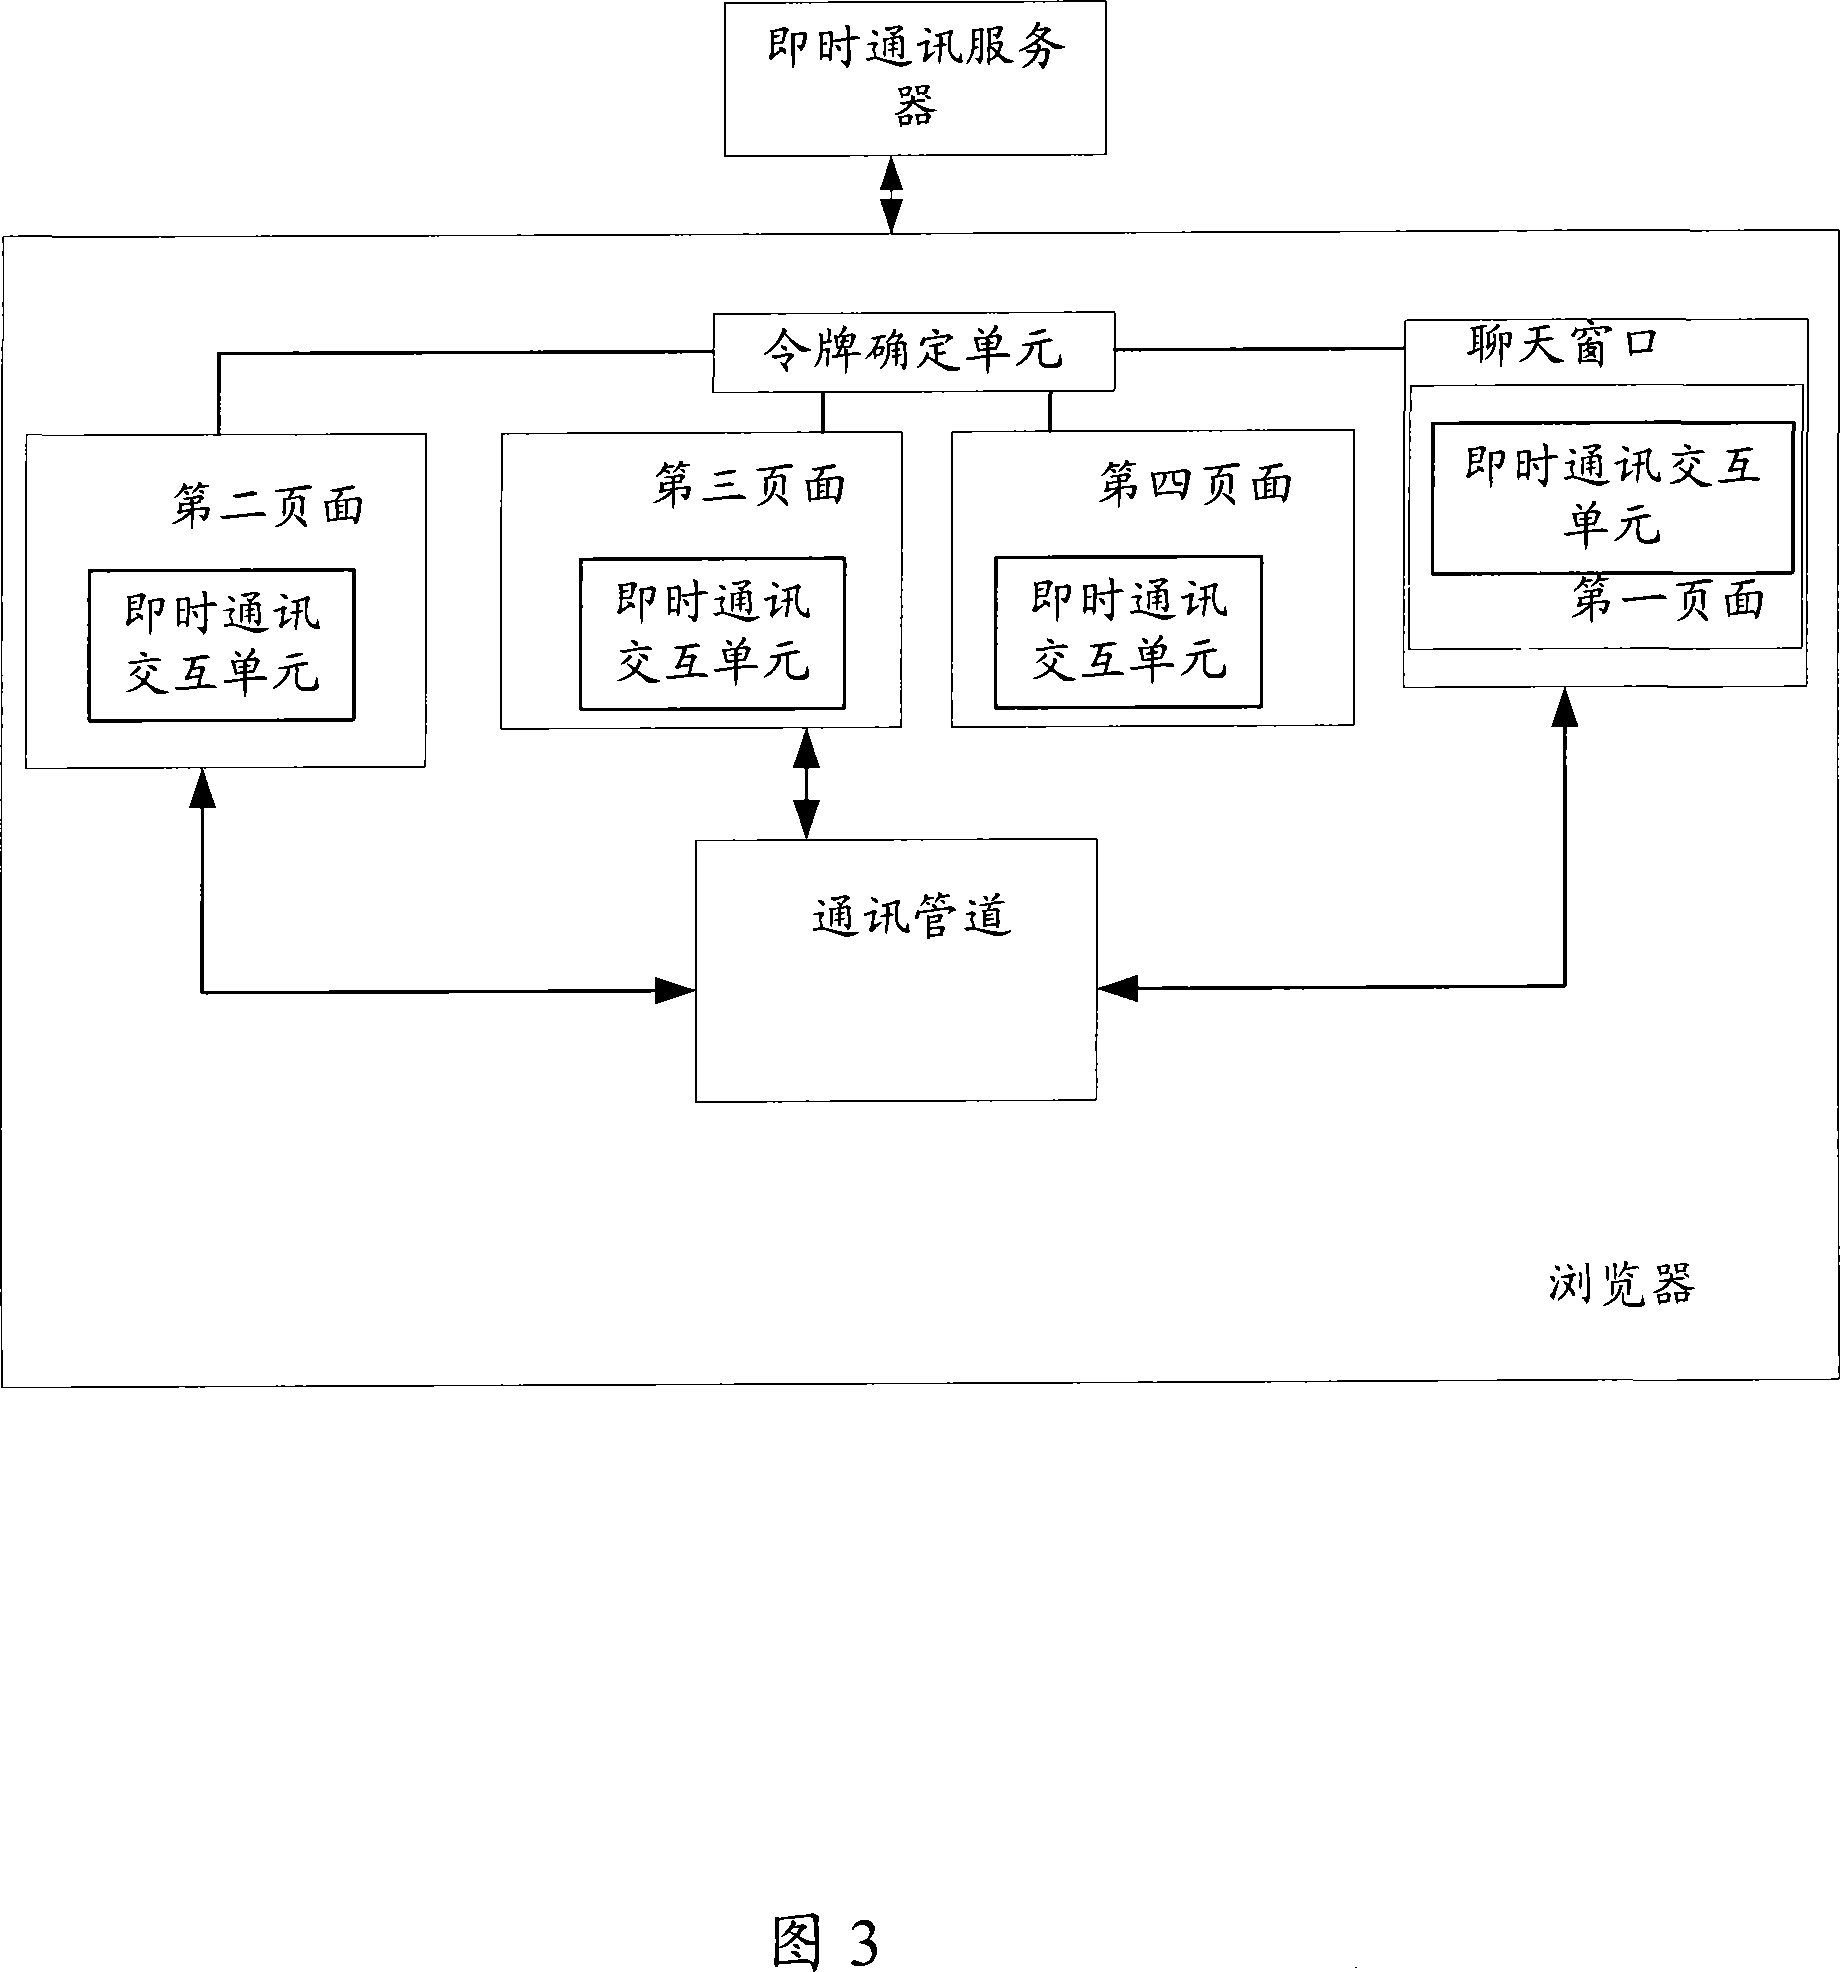 Multi-page instant communication method and system